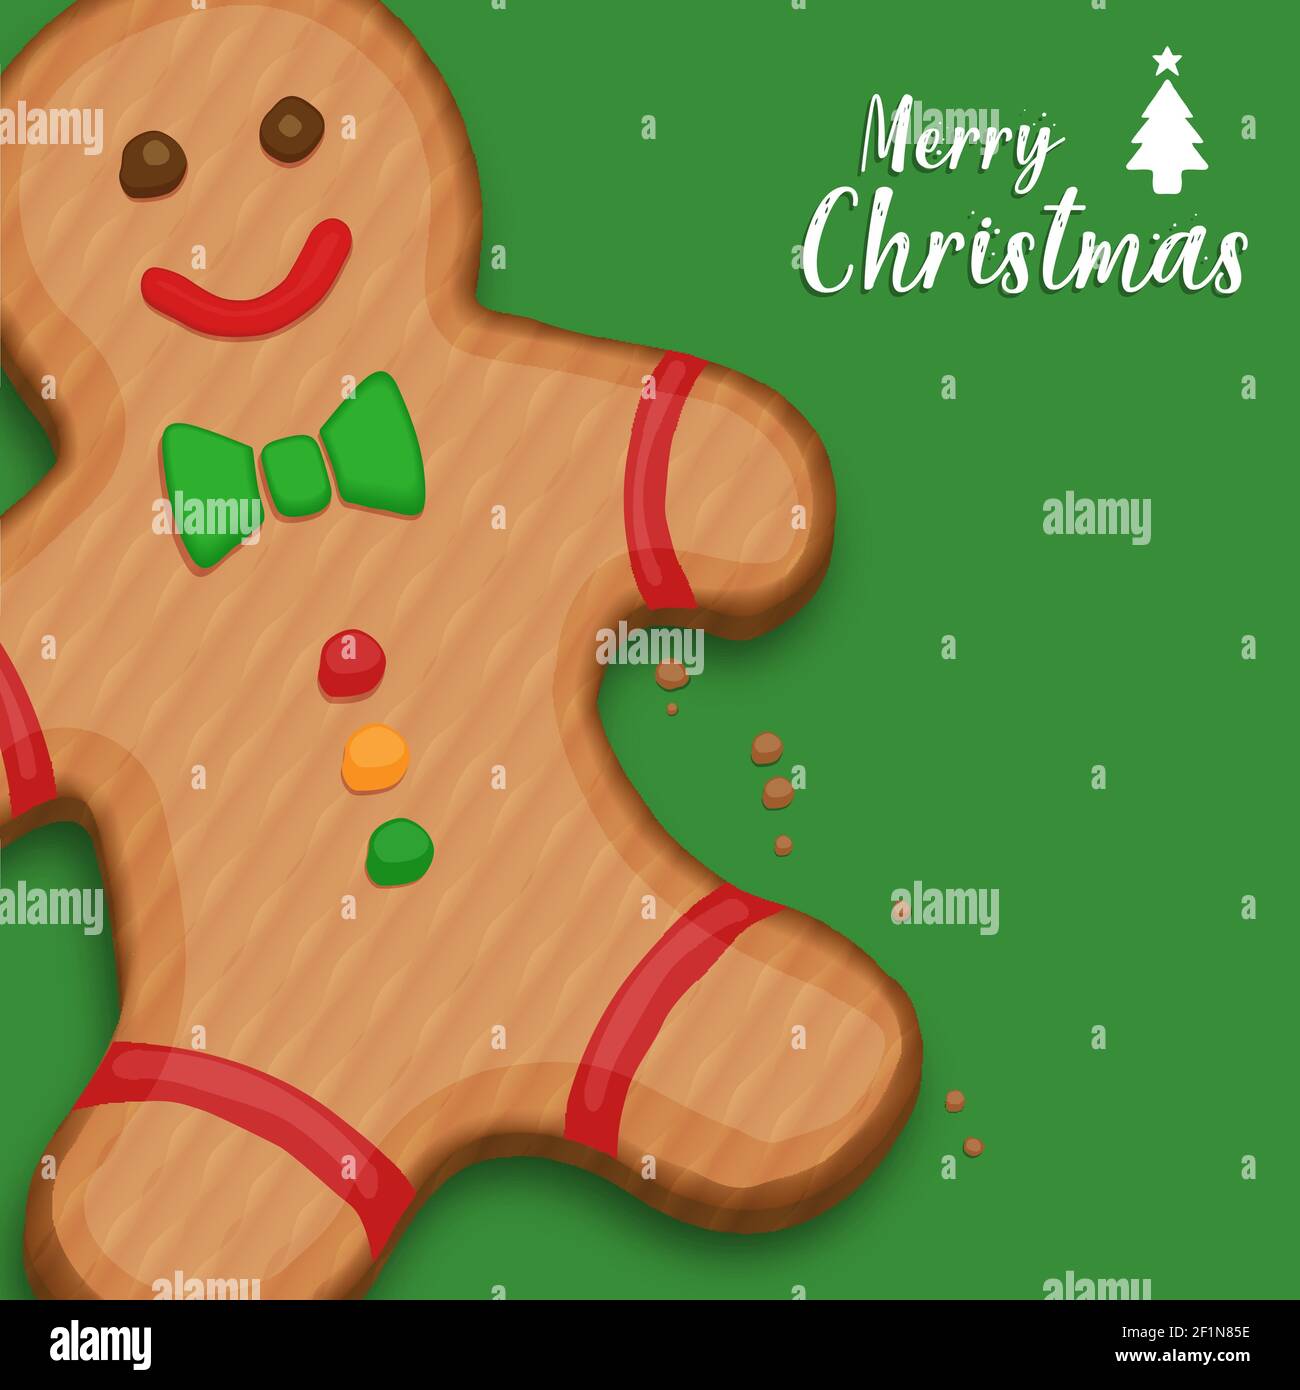 Merry Christmas greeting card illustration of funny gingerbread man cookie in hand drawn style. Traditional holiday food cartoon for xmas wishes or pa Stock Vector